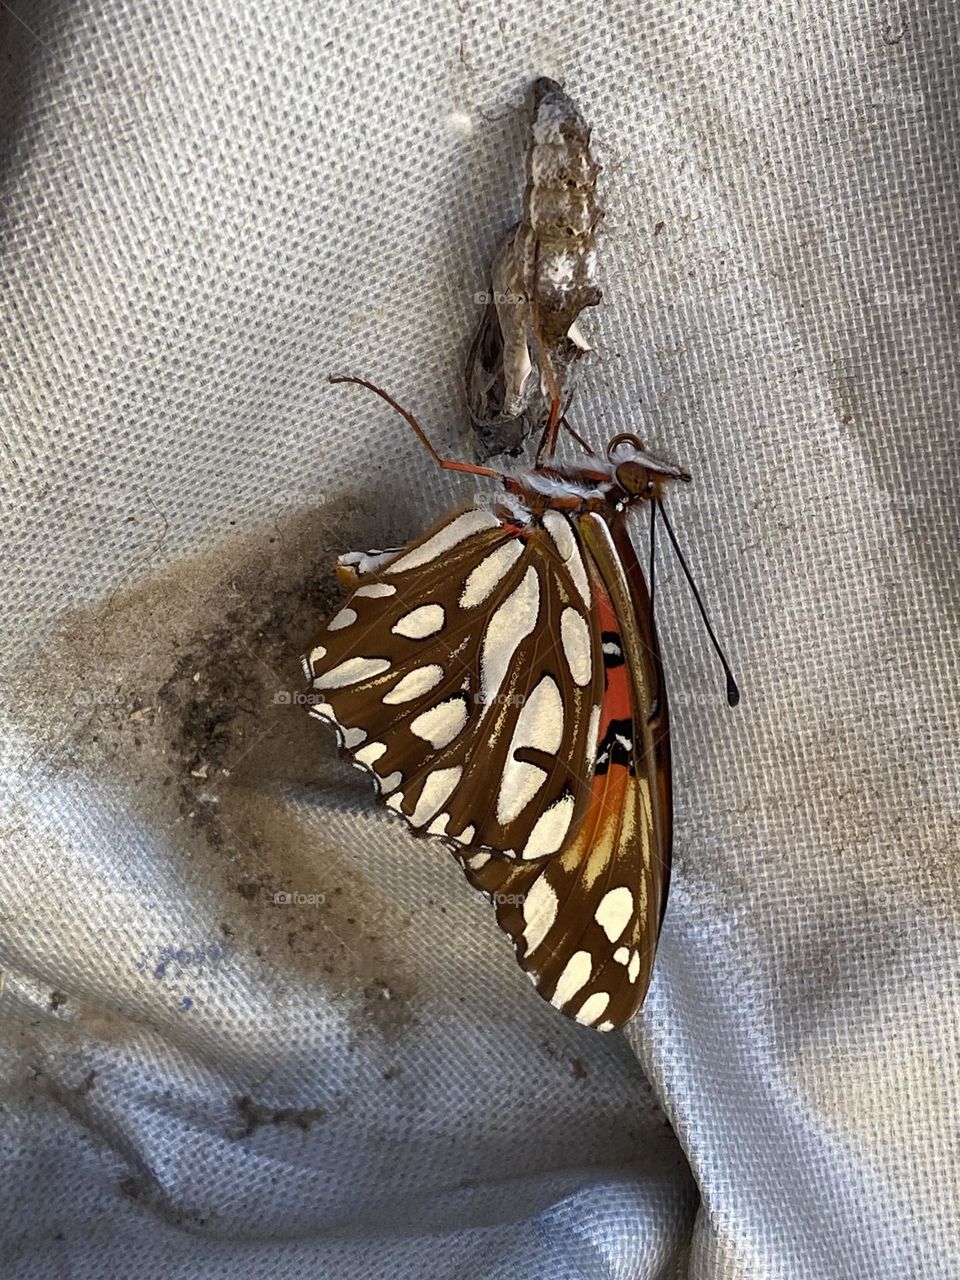 Gulf Fritillary Butterfly and cocoon 